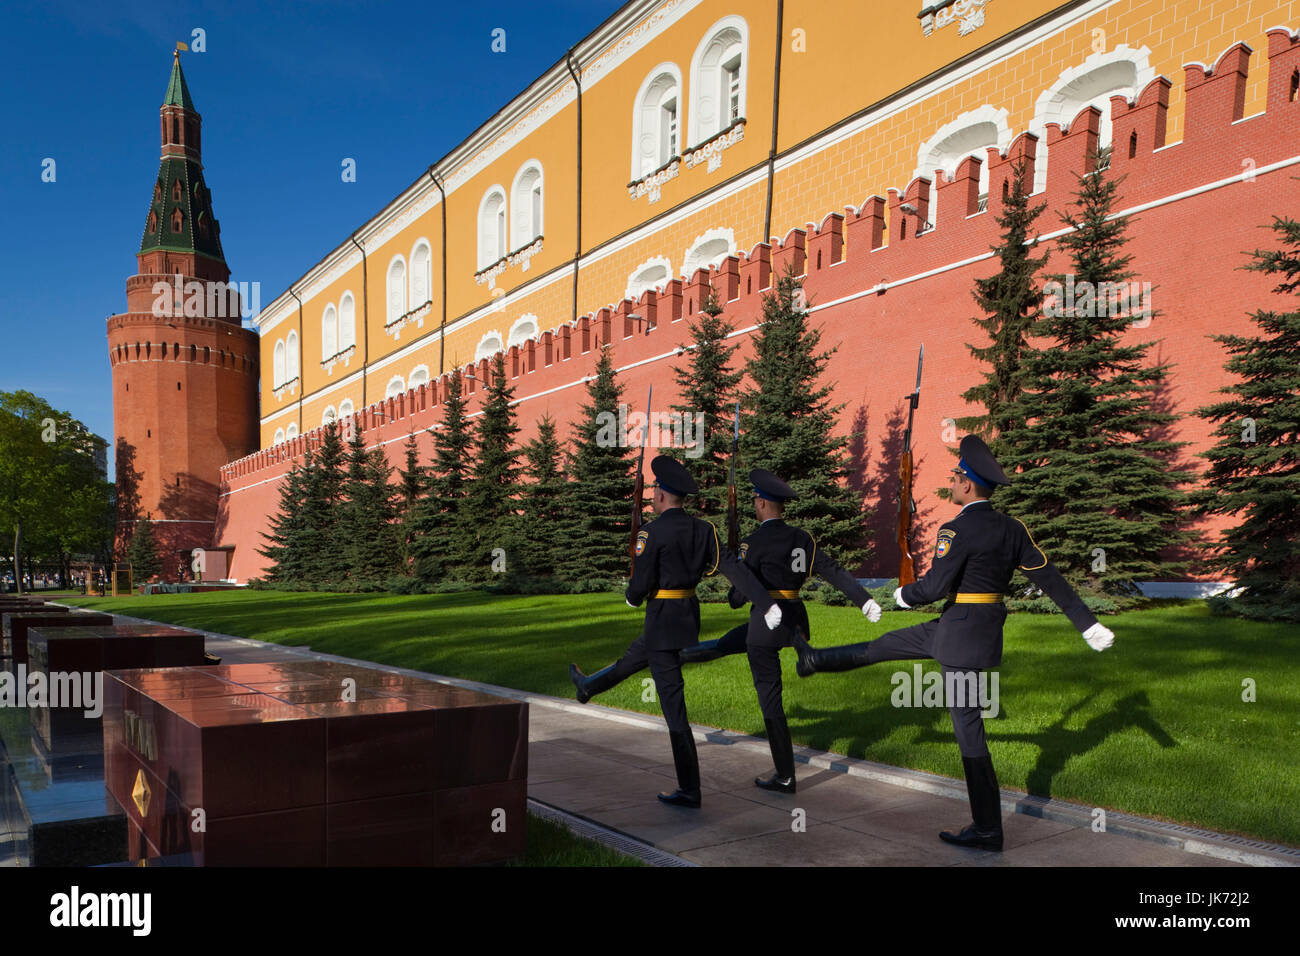 Russia, Moscow Oblast, Moscow, Kremlin, Alexandrovsky Garden and Tomb of the Unknown Soldier Stock Photo